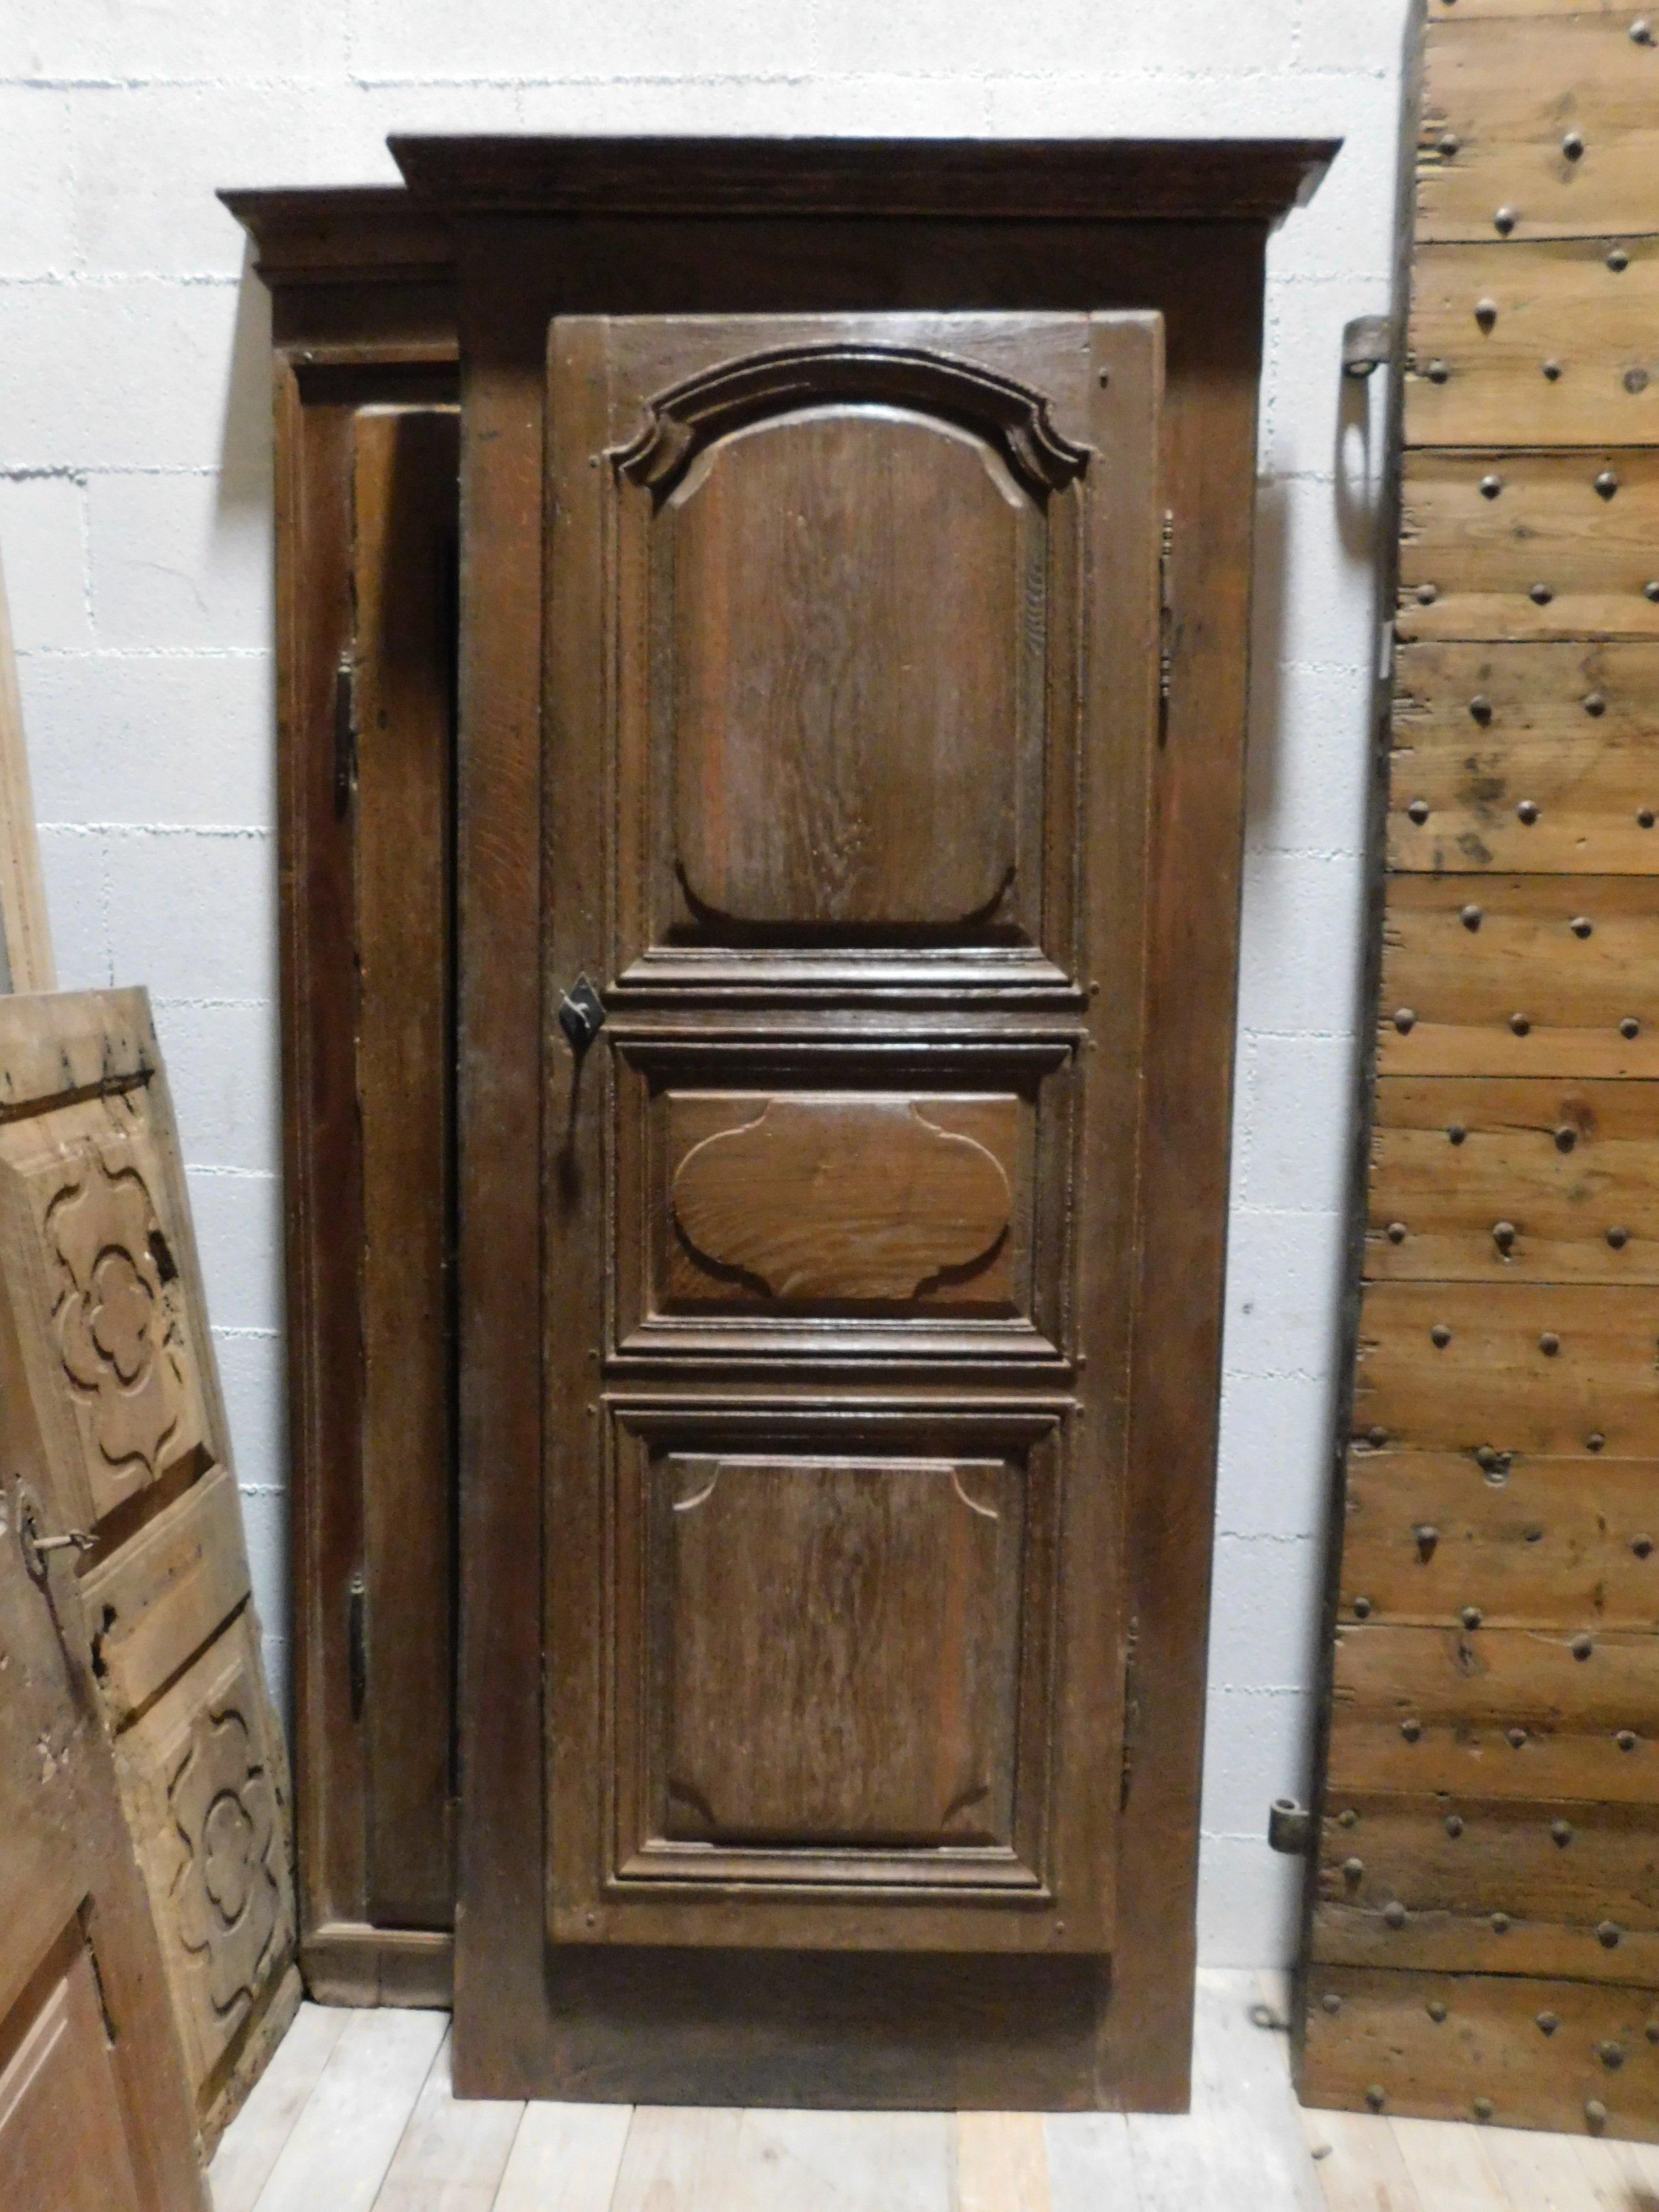 Antique oak wall placard, single door built-in wardrobe with carved panels and original uprights, built for a closet and built-in wardrobe of an 18th century Italian house.
maximum size with frame H 204 cm x W 92 cm, external sides 82 cm wide,